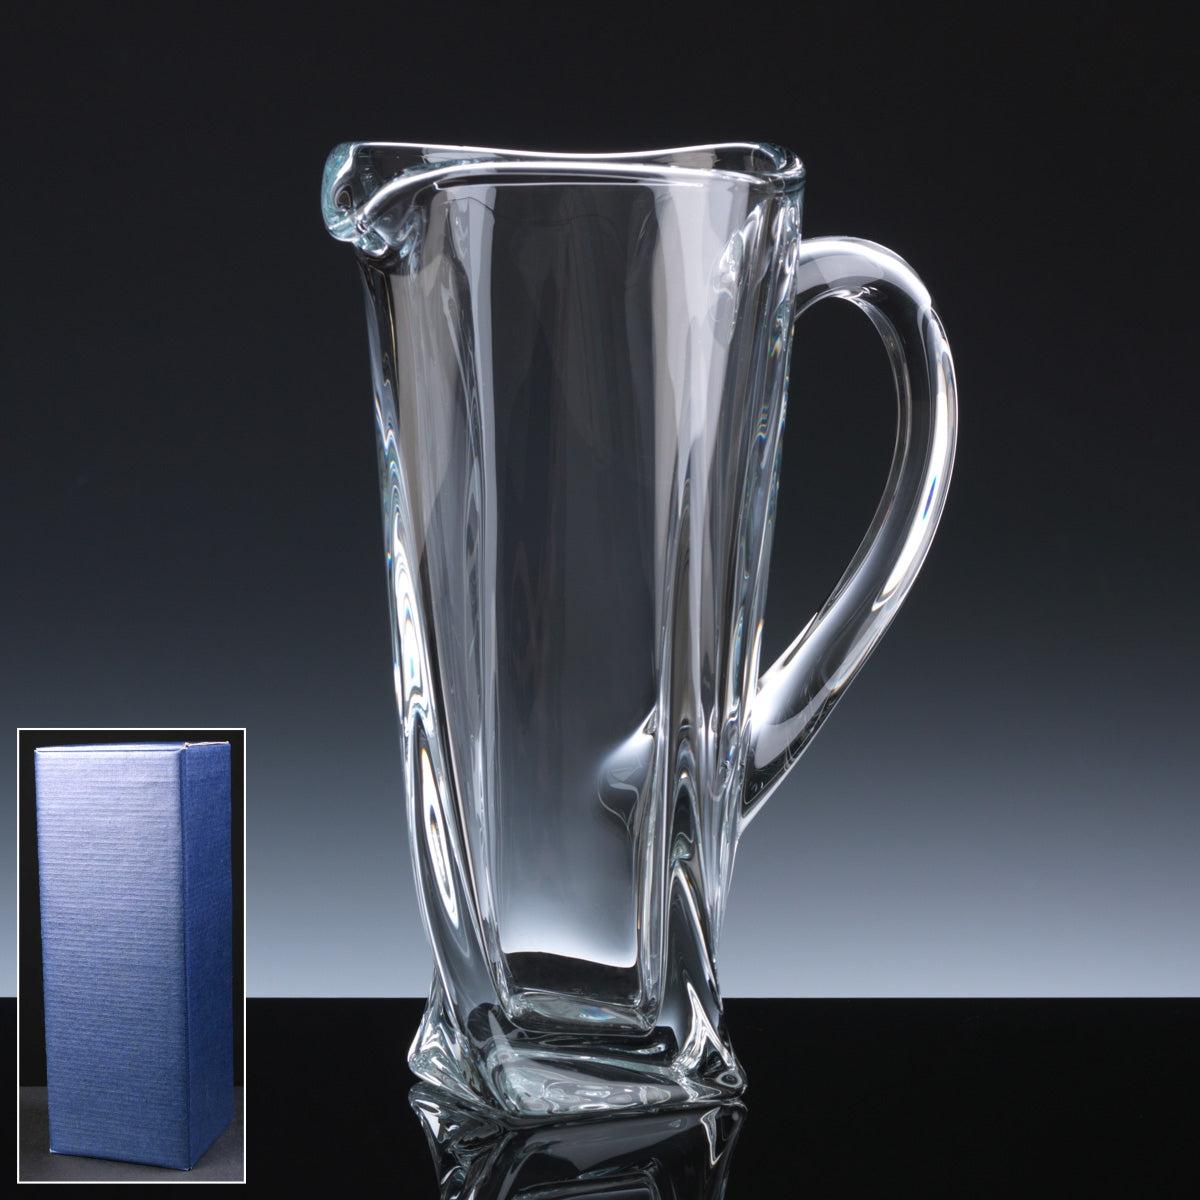 Quadro 0.8l Crystal Jug, Blue Box (available with engraving)